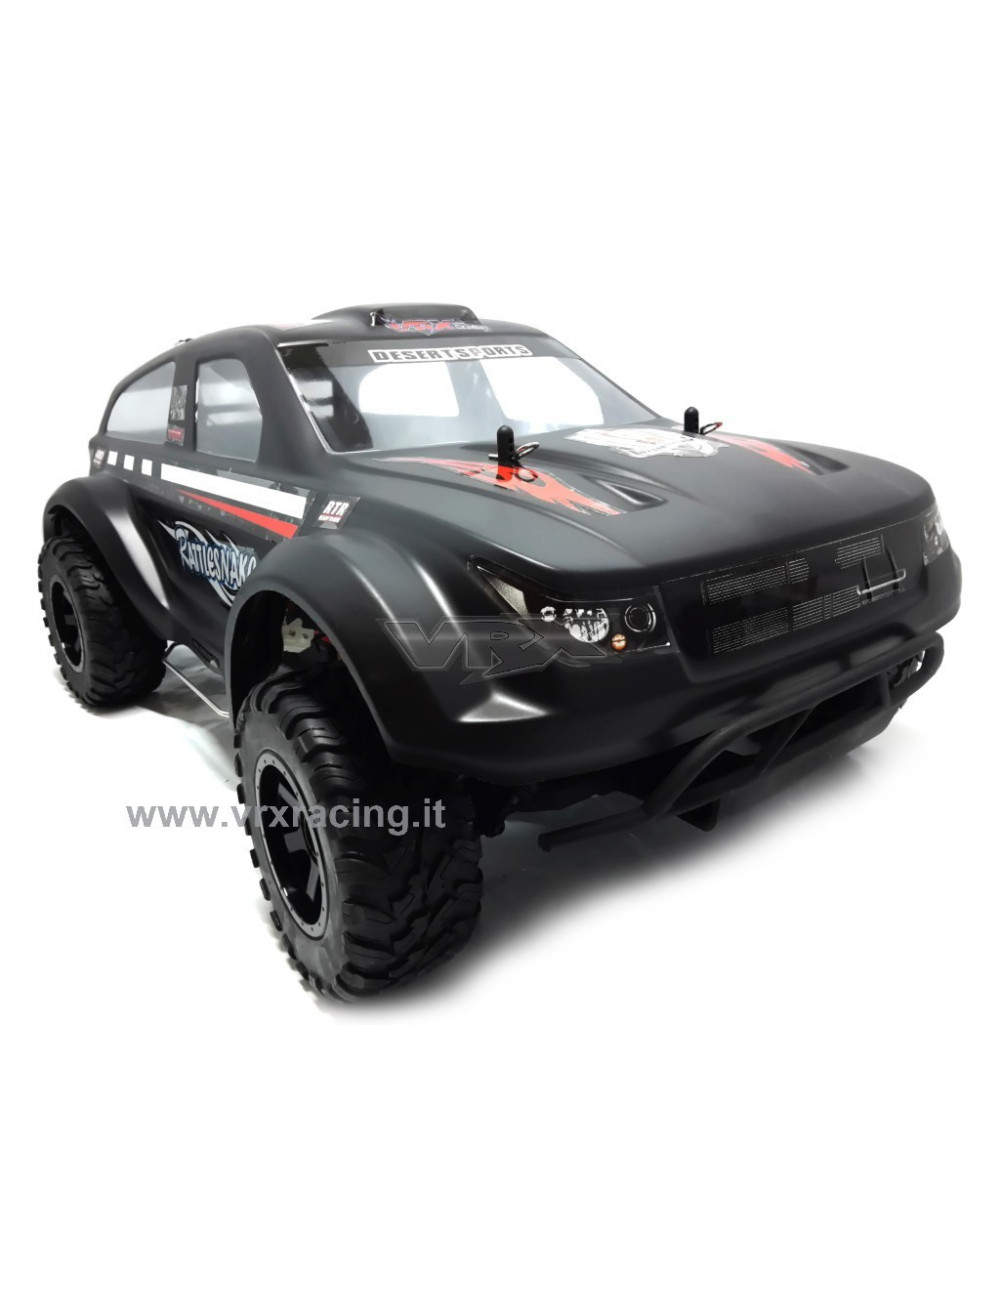 RATTLESNAKE EBD SUV 1/10 off-road elettrico a spazzola telaio in metallo 2.4 Ghz 4WD RTR VRX